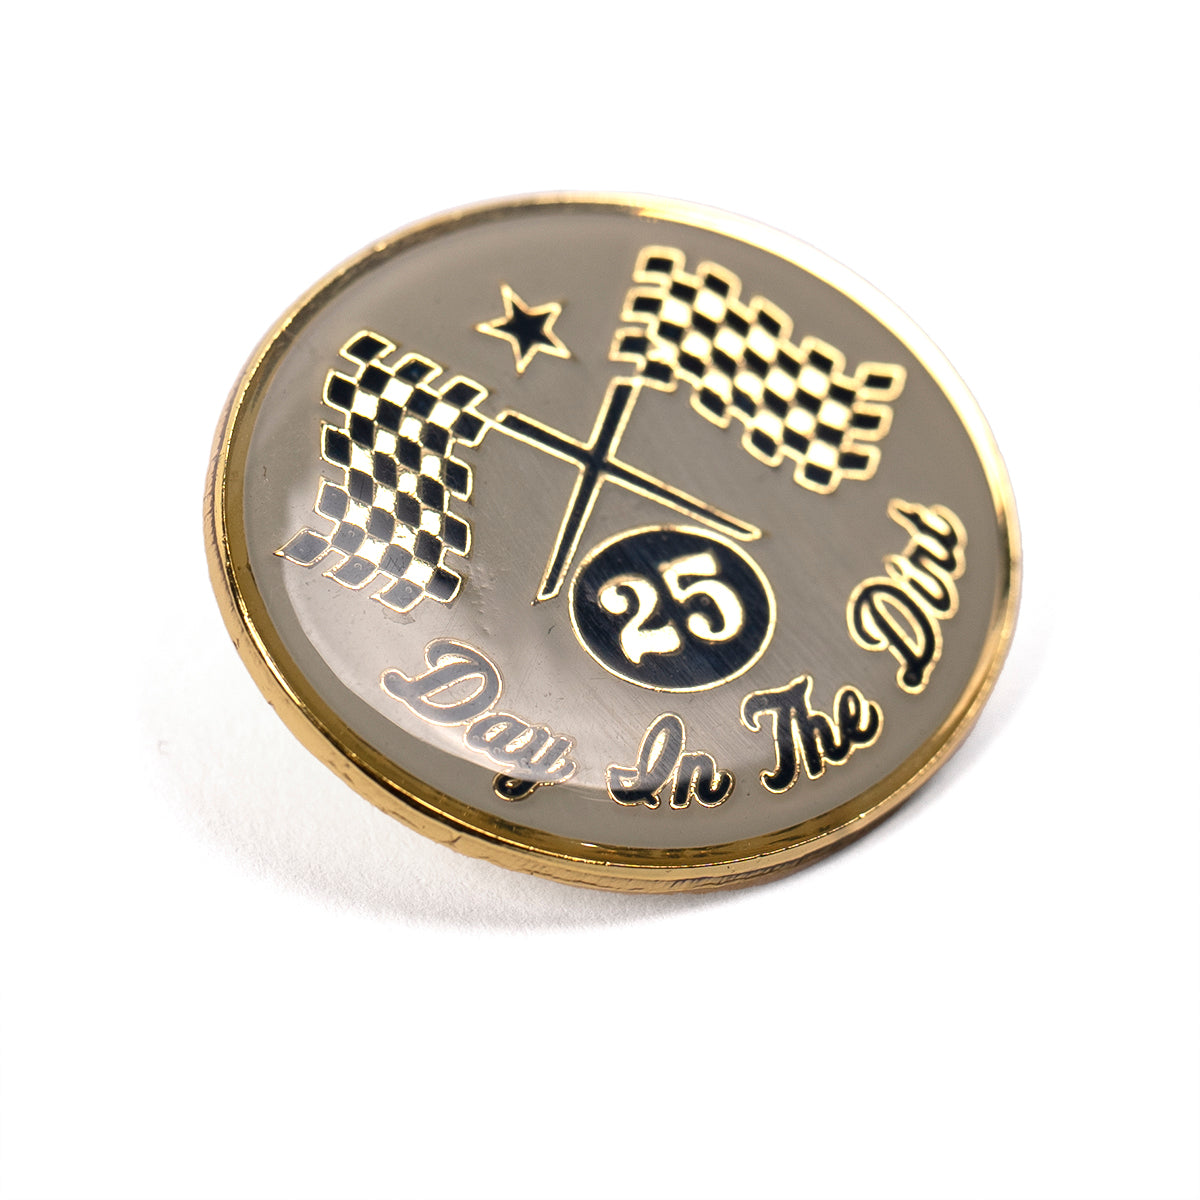 Red Bull Day in the Dirt 25 Pin Set